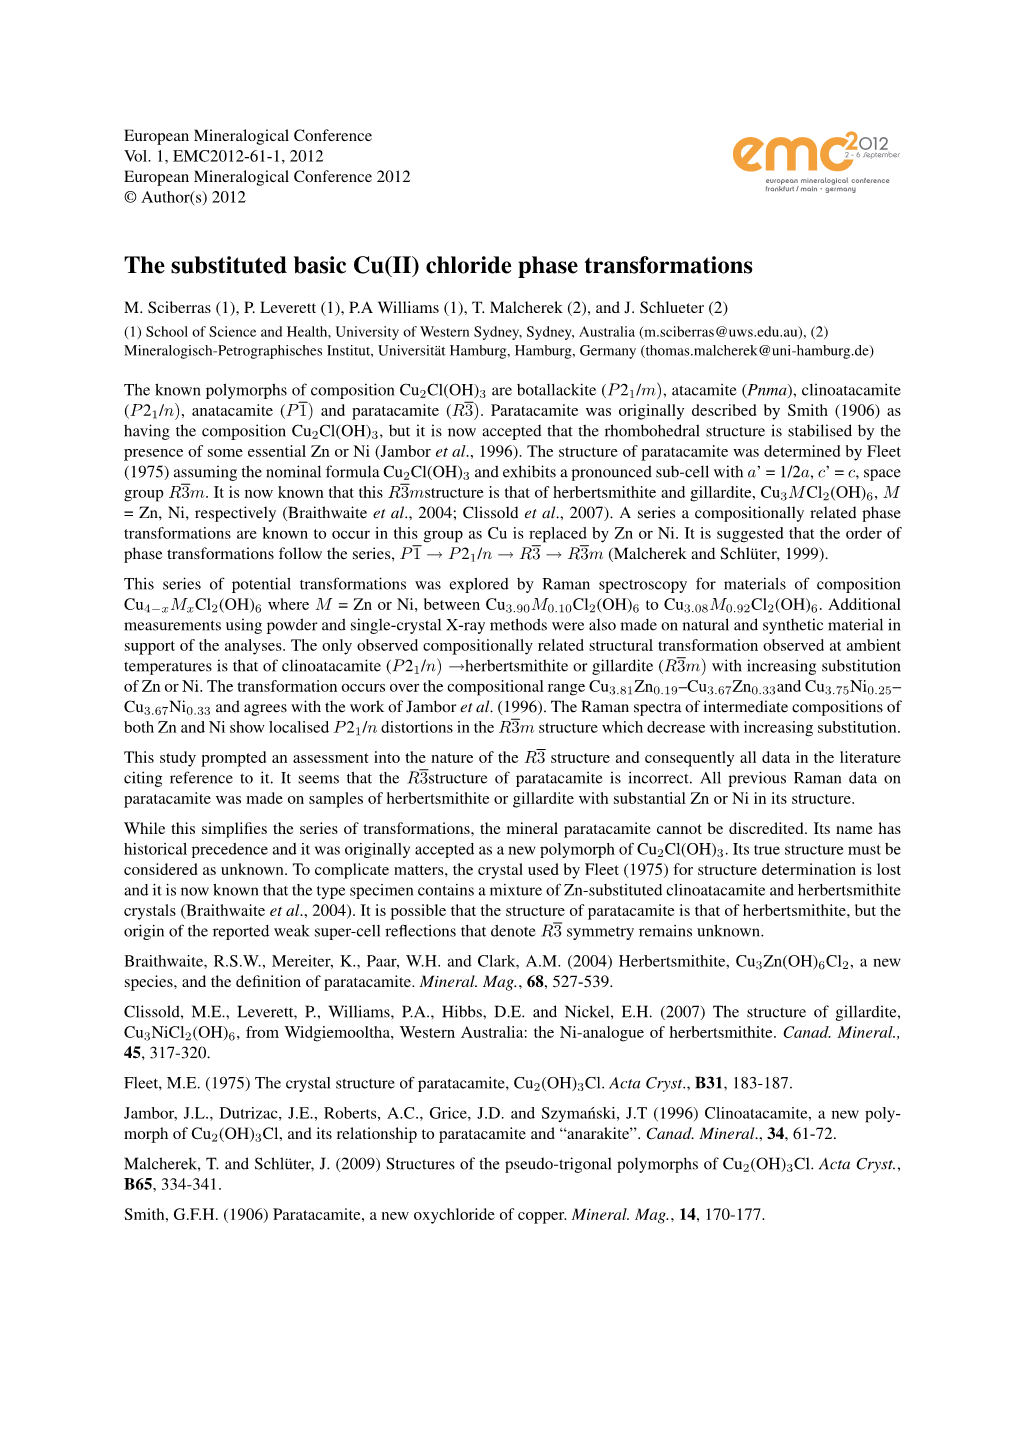 The Substituted Basic Cu(II) Chloride Phase Transformations